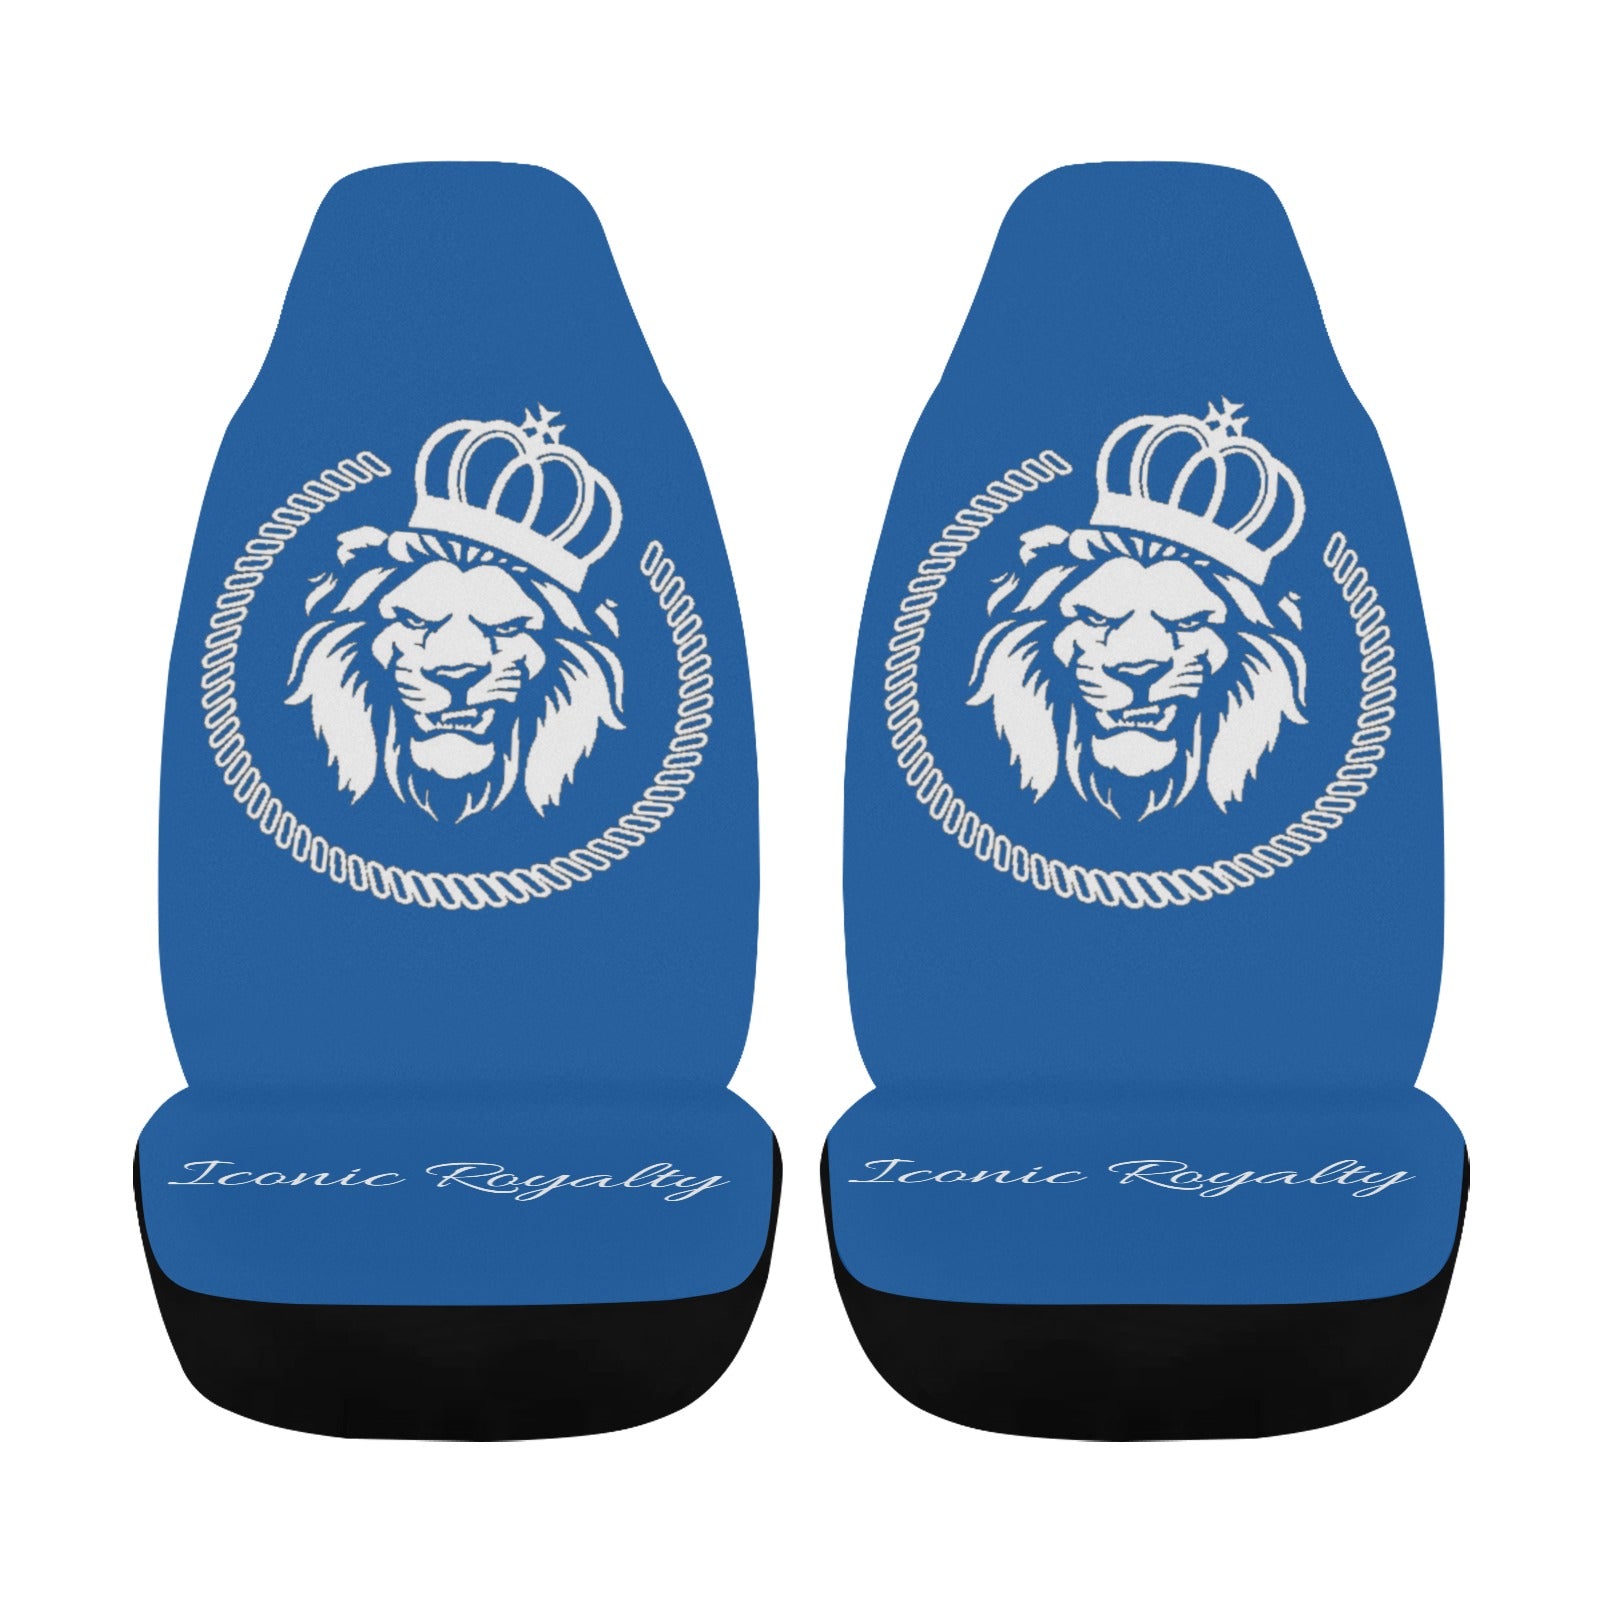 Iconic Royalty Crown Lion Car Seat Cover Airbag Compatible(Set of 2)